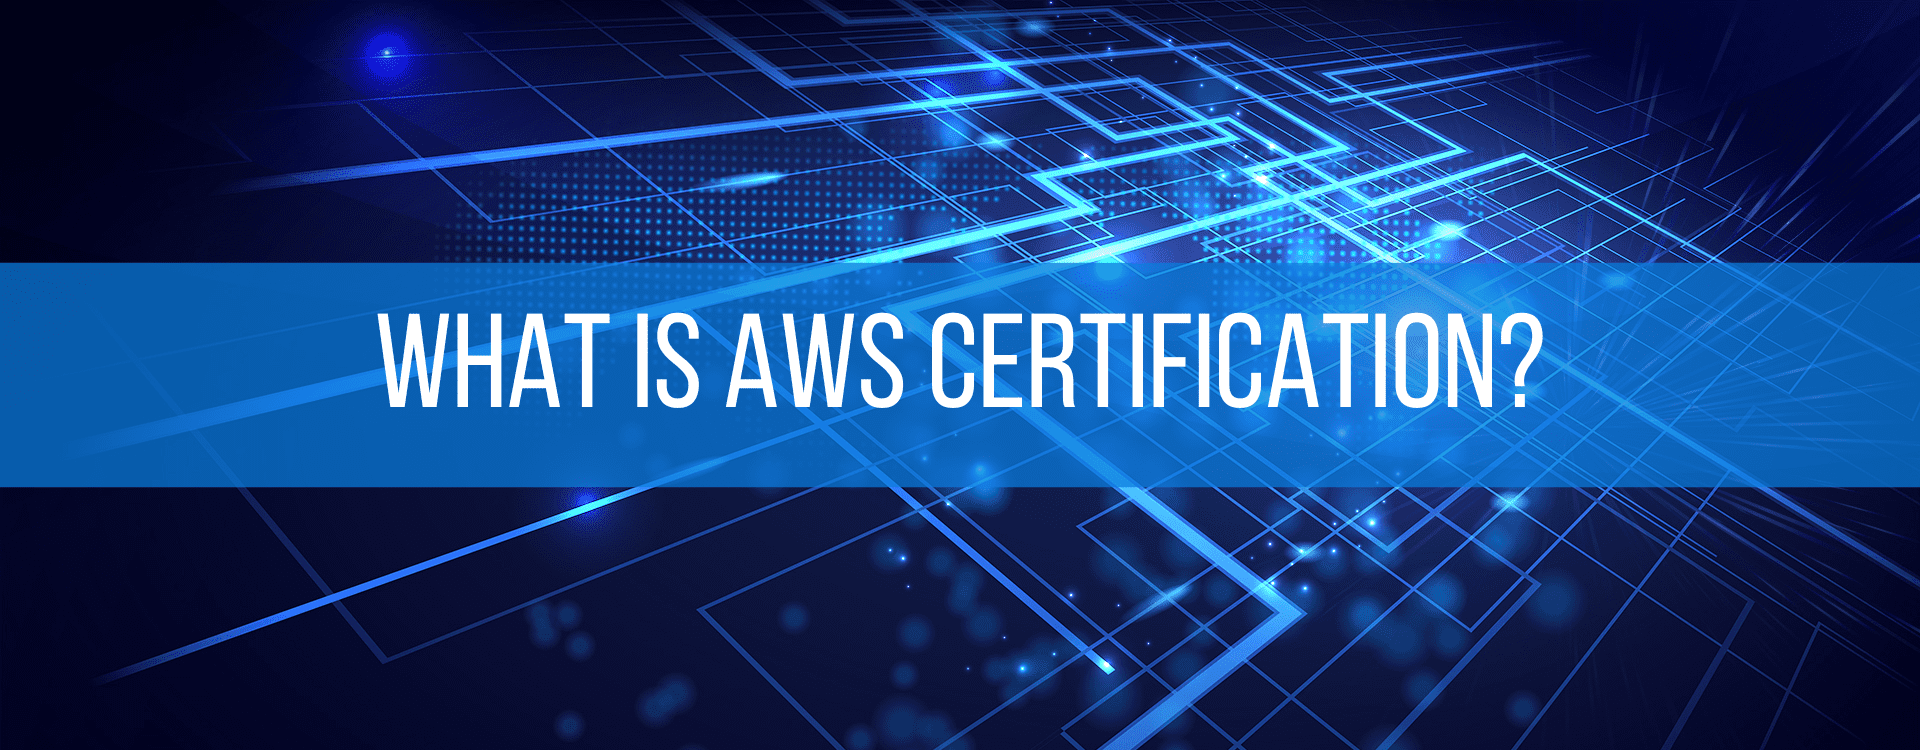 what is aws certification